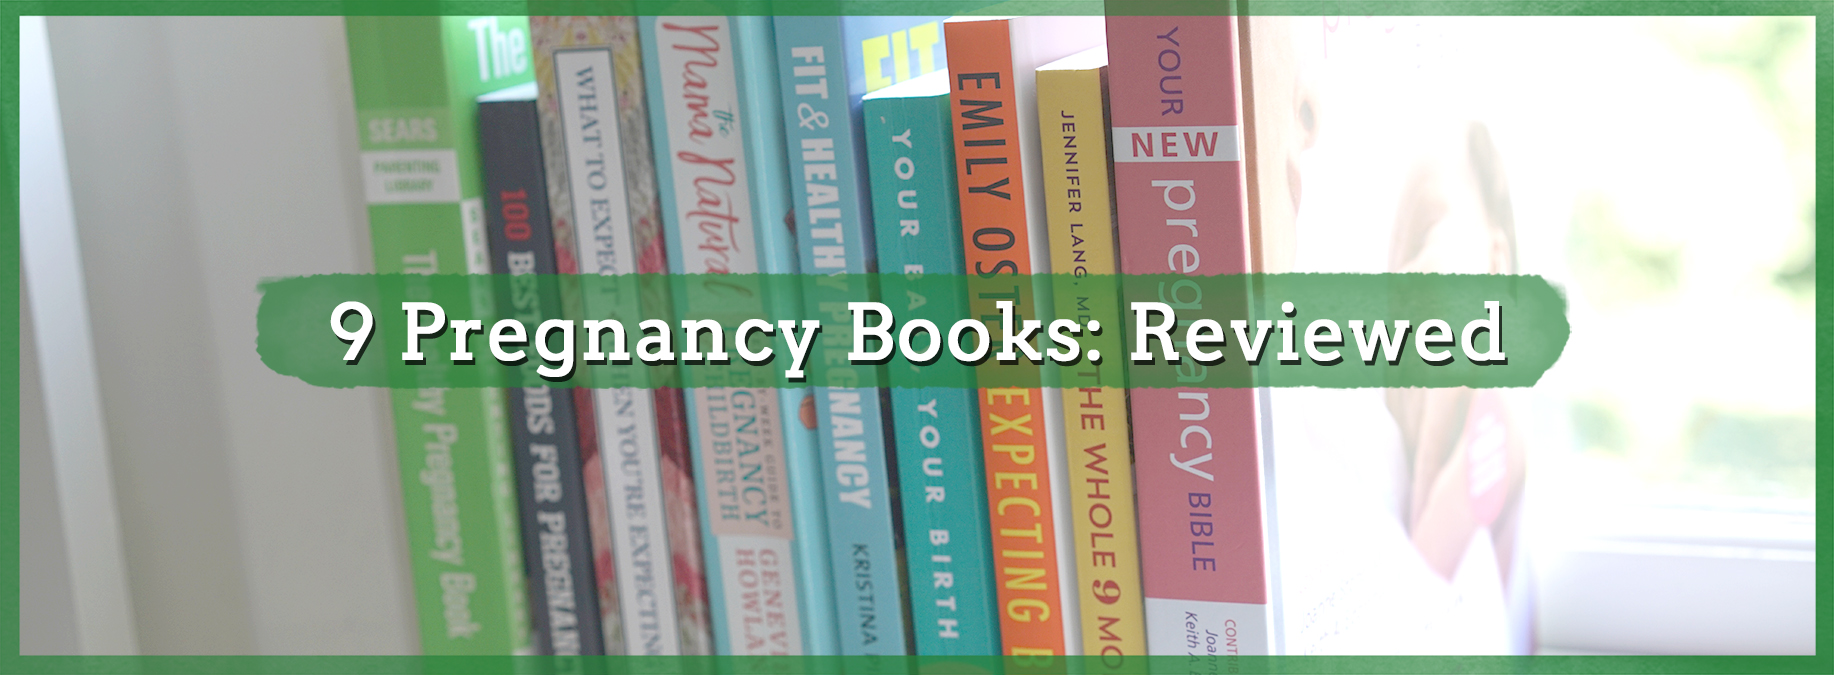 Pregnancy Books Reviewed